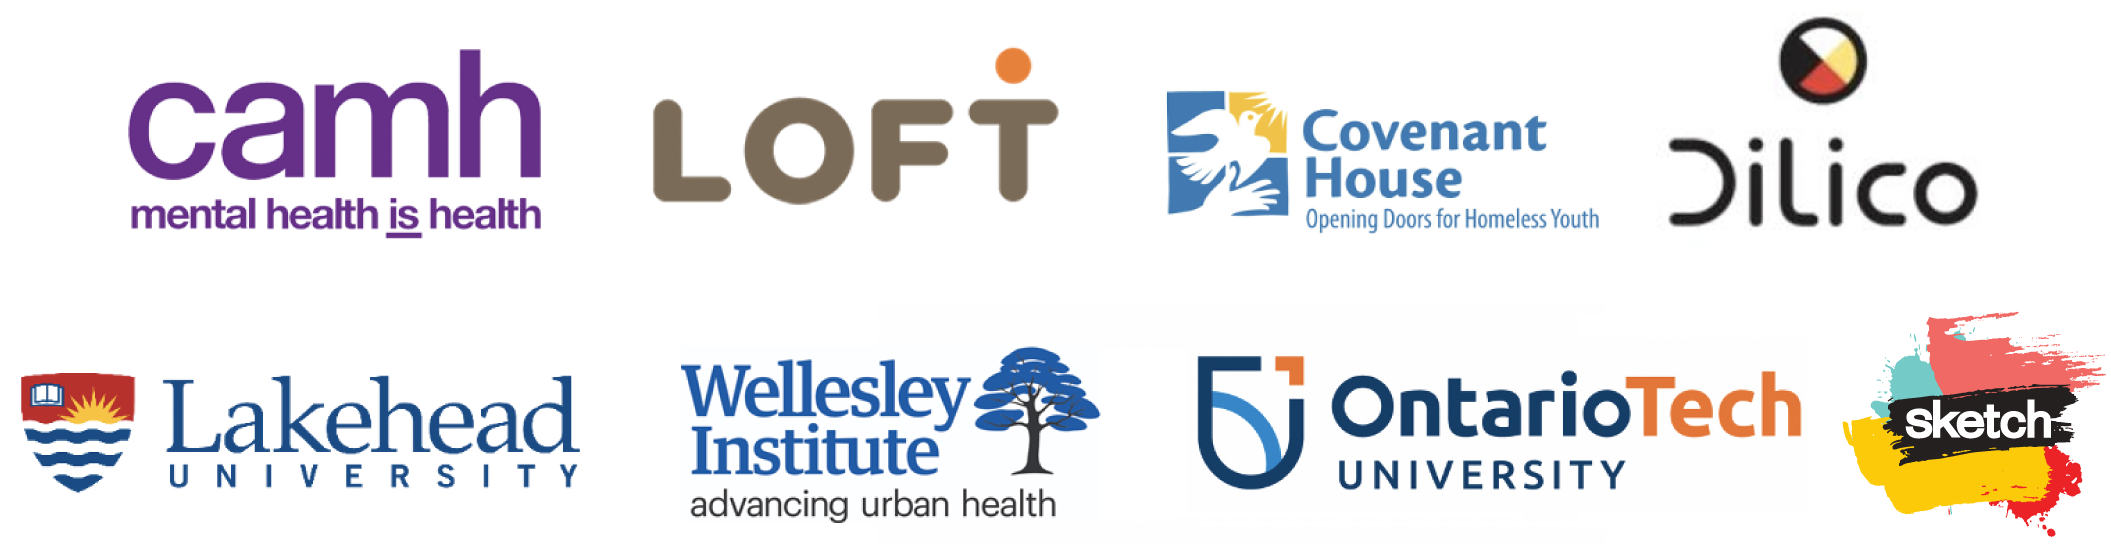 Partner logos: Centre for Addition and Mental Health, Wellesley Institute, LOFT, Covenant House, Dilico, Lakehead University, Ontario Tech University, and SKETCH